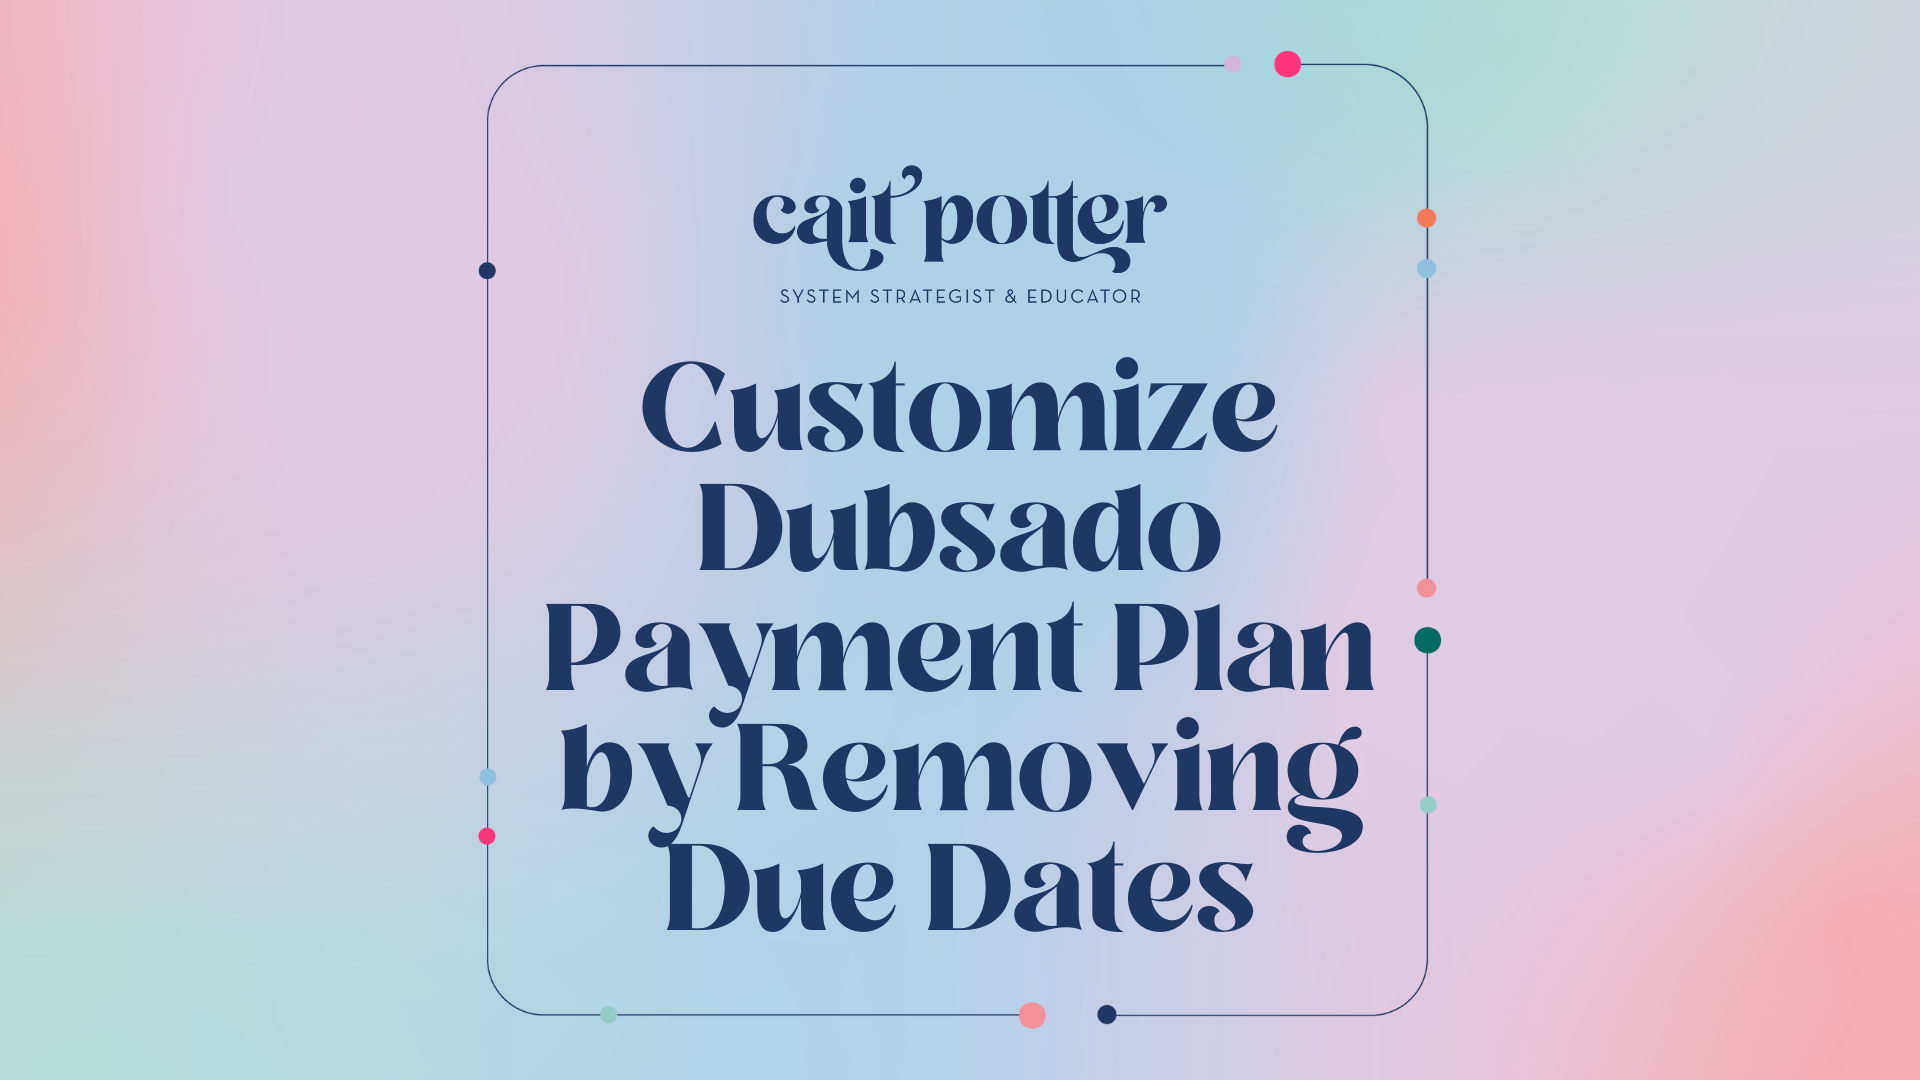 Customize Dubsado Payment Plan by Removing Due Dates